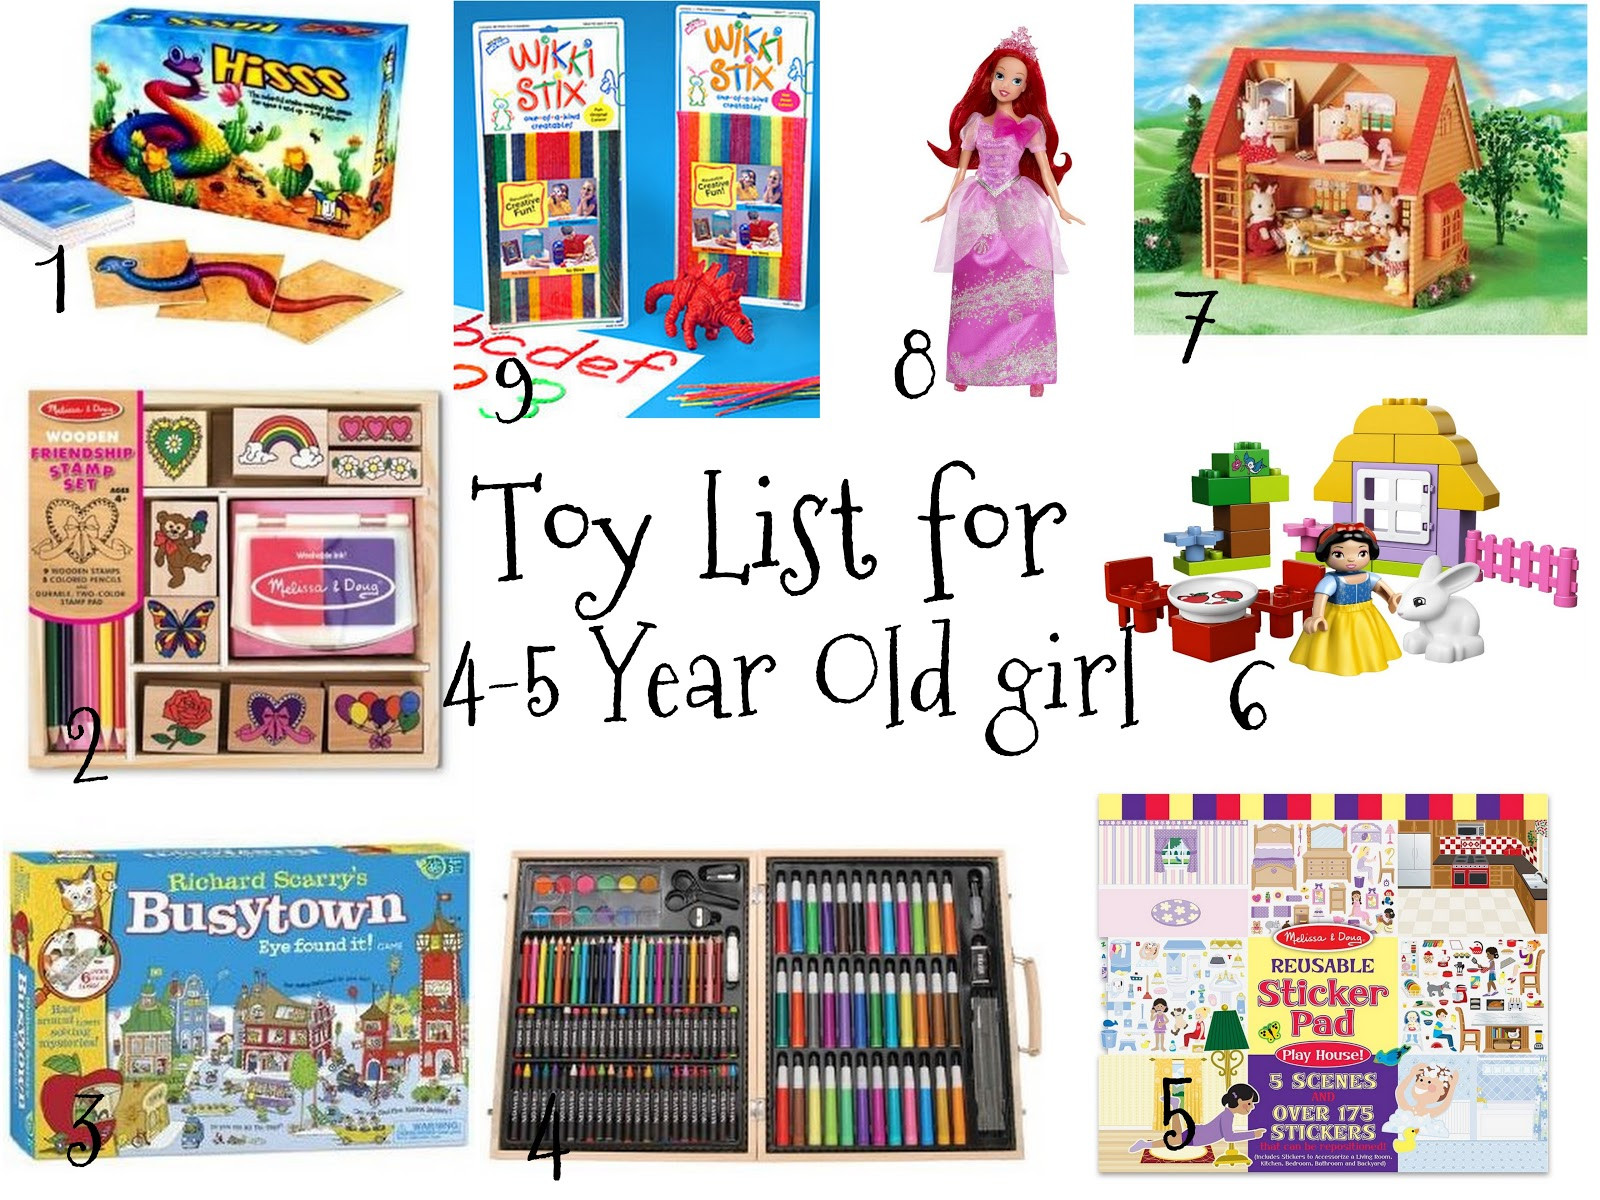 Christmas Gift Ideas For 4 Year Old Girl
 Favorites and Things Christmas Toy List for 4 5 Year Old